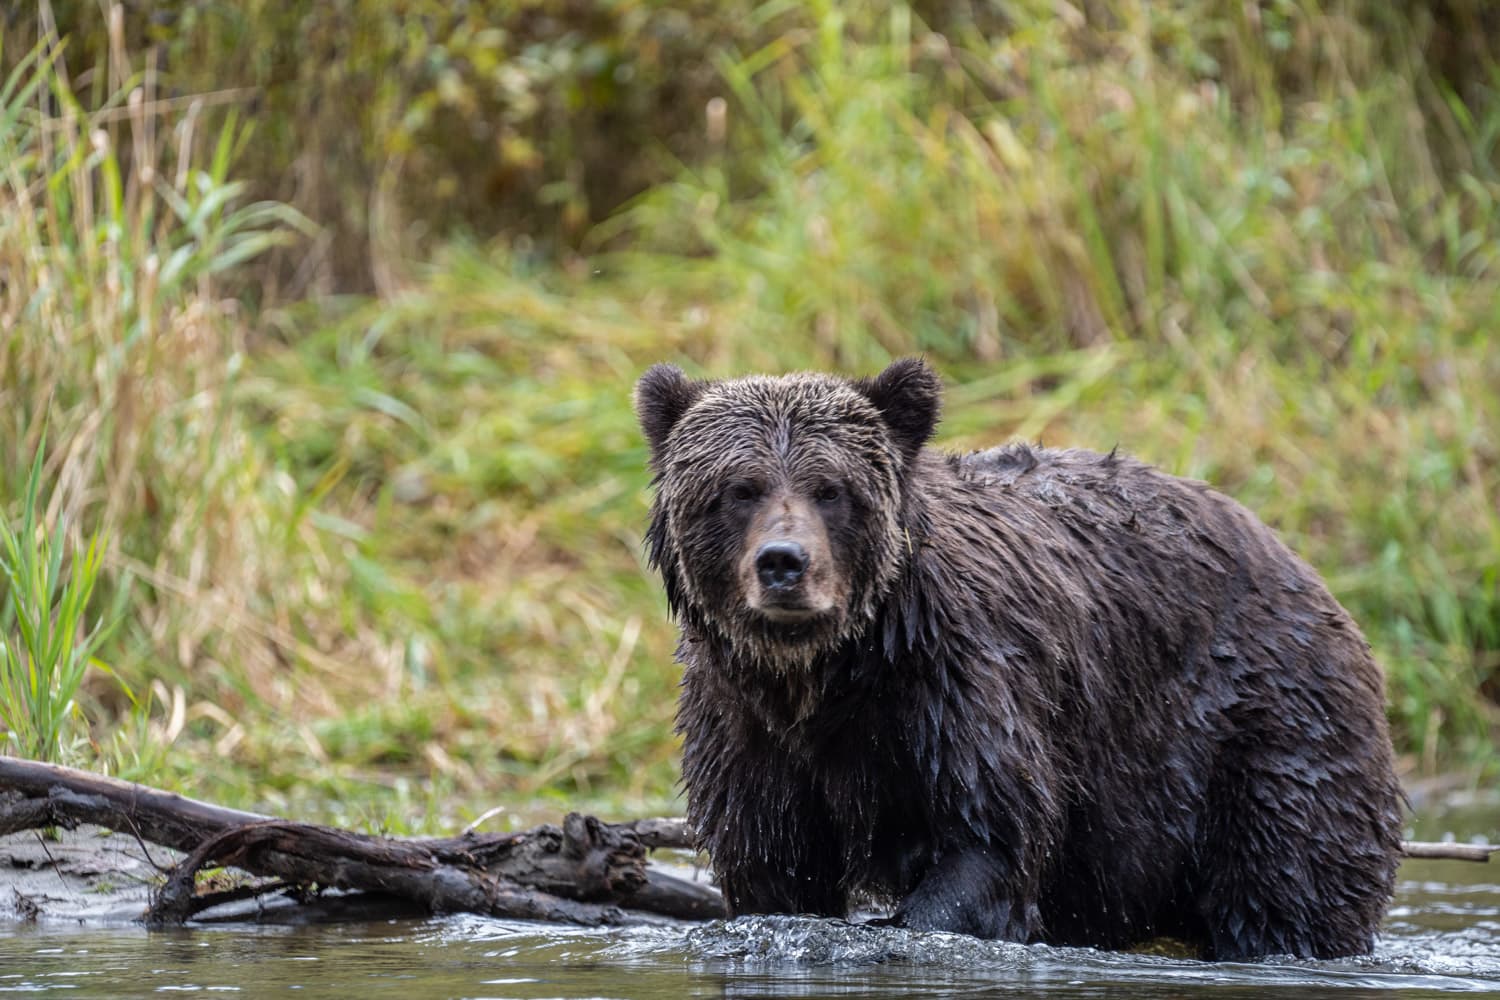 Watching Bears in BC: 3 Ways to See Grizzlies in the Wild in 2021